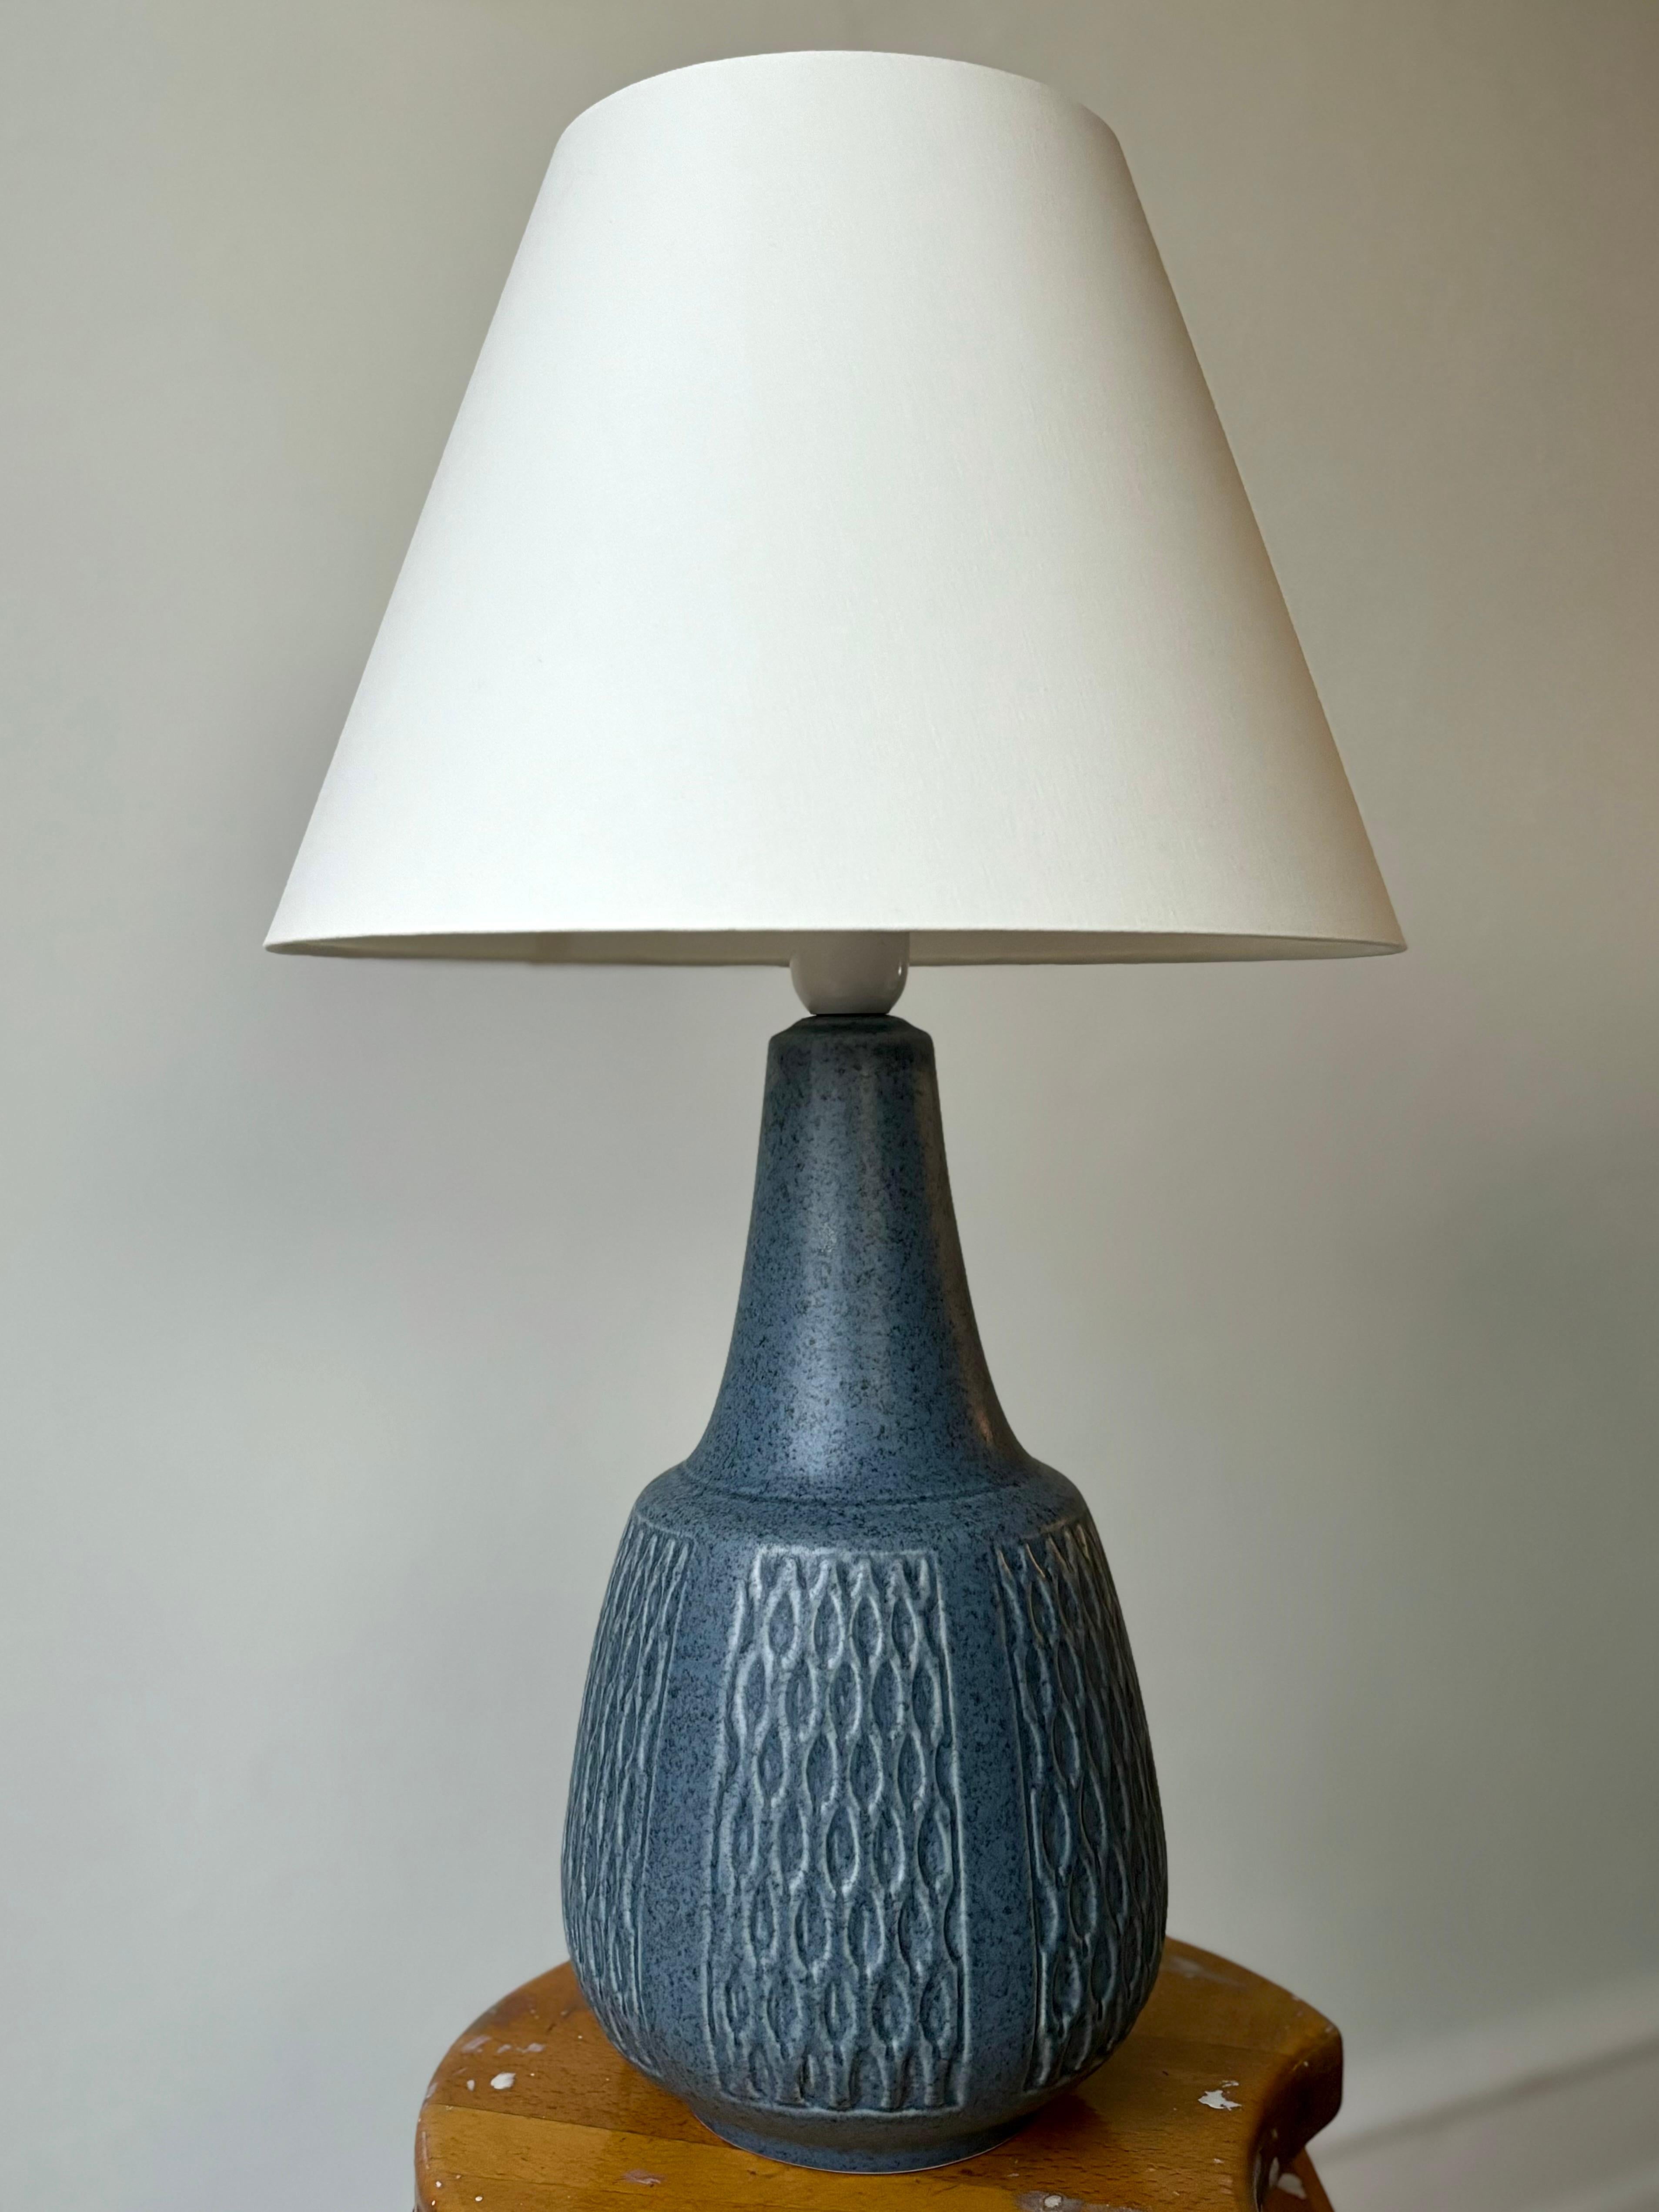 Dusty light blue ceramic table lamp handmade by Danish ceramic artist Einar Johansen in the 1960s. Graphic relief pattern around the belly with speckled matte glaze. Signed and numbered under base. 
Beautiful vintage condition.
Denmark, 1960s. 